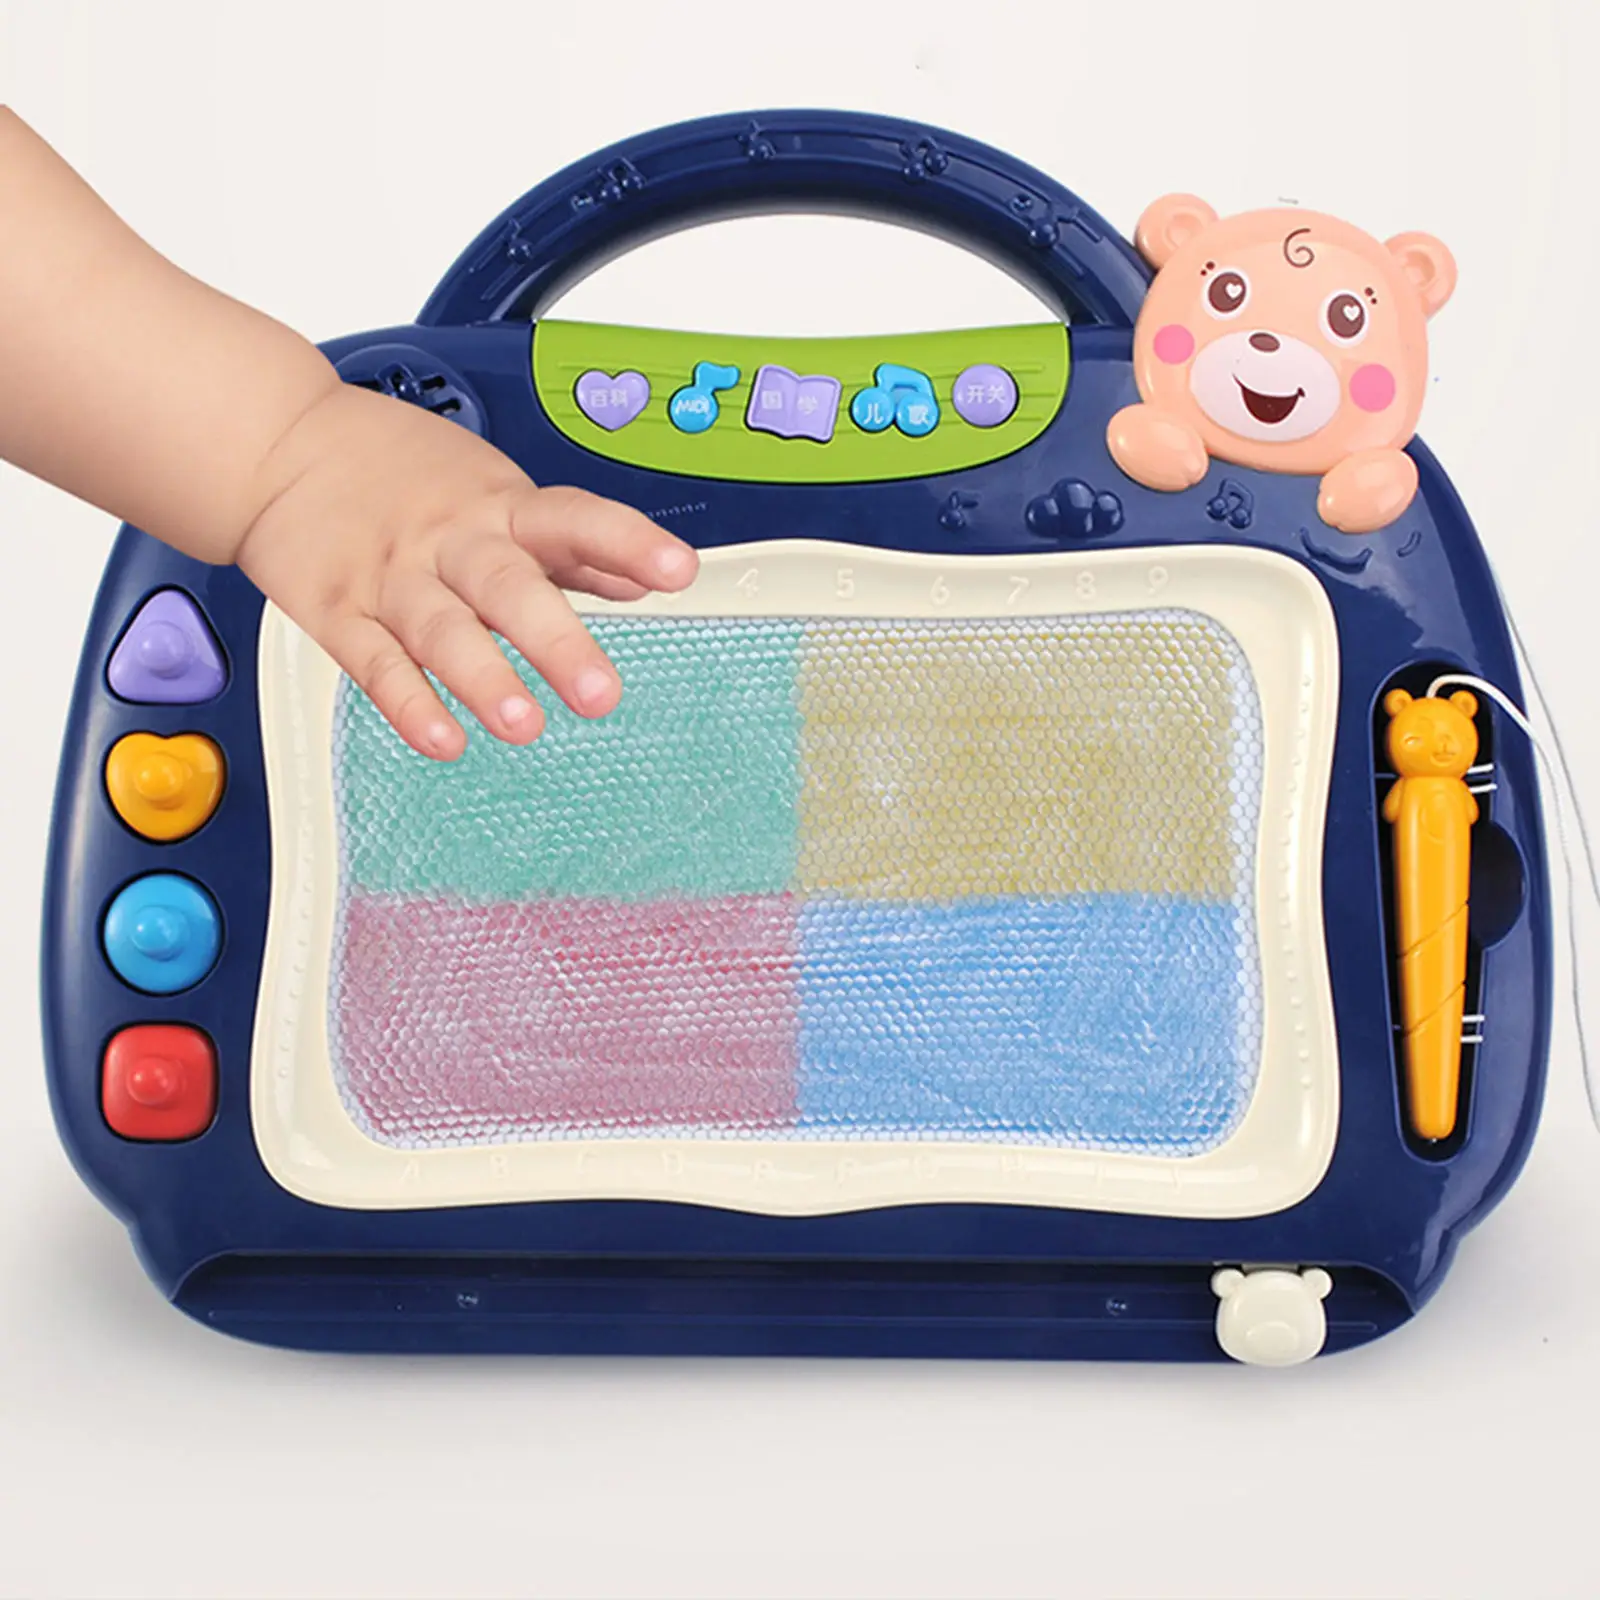 Magnetic Drawing Board Motor Skills with Music Toddler Toys Gifts Magnet Writing Painting Etch Sketch Pad for Kids Travel Toys